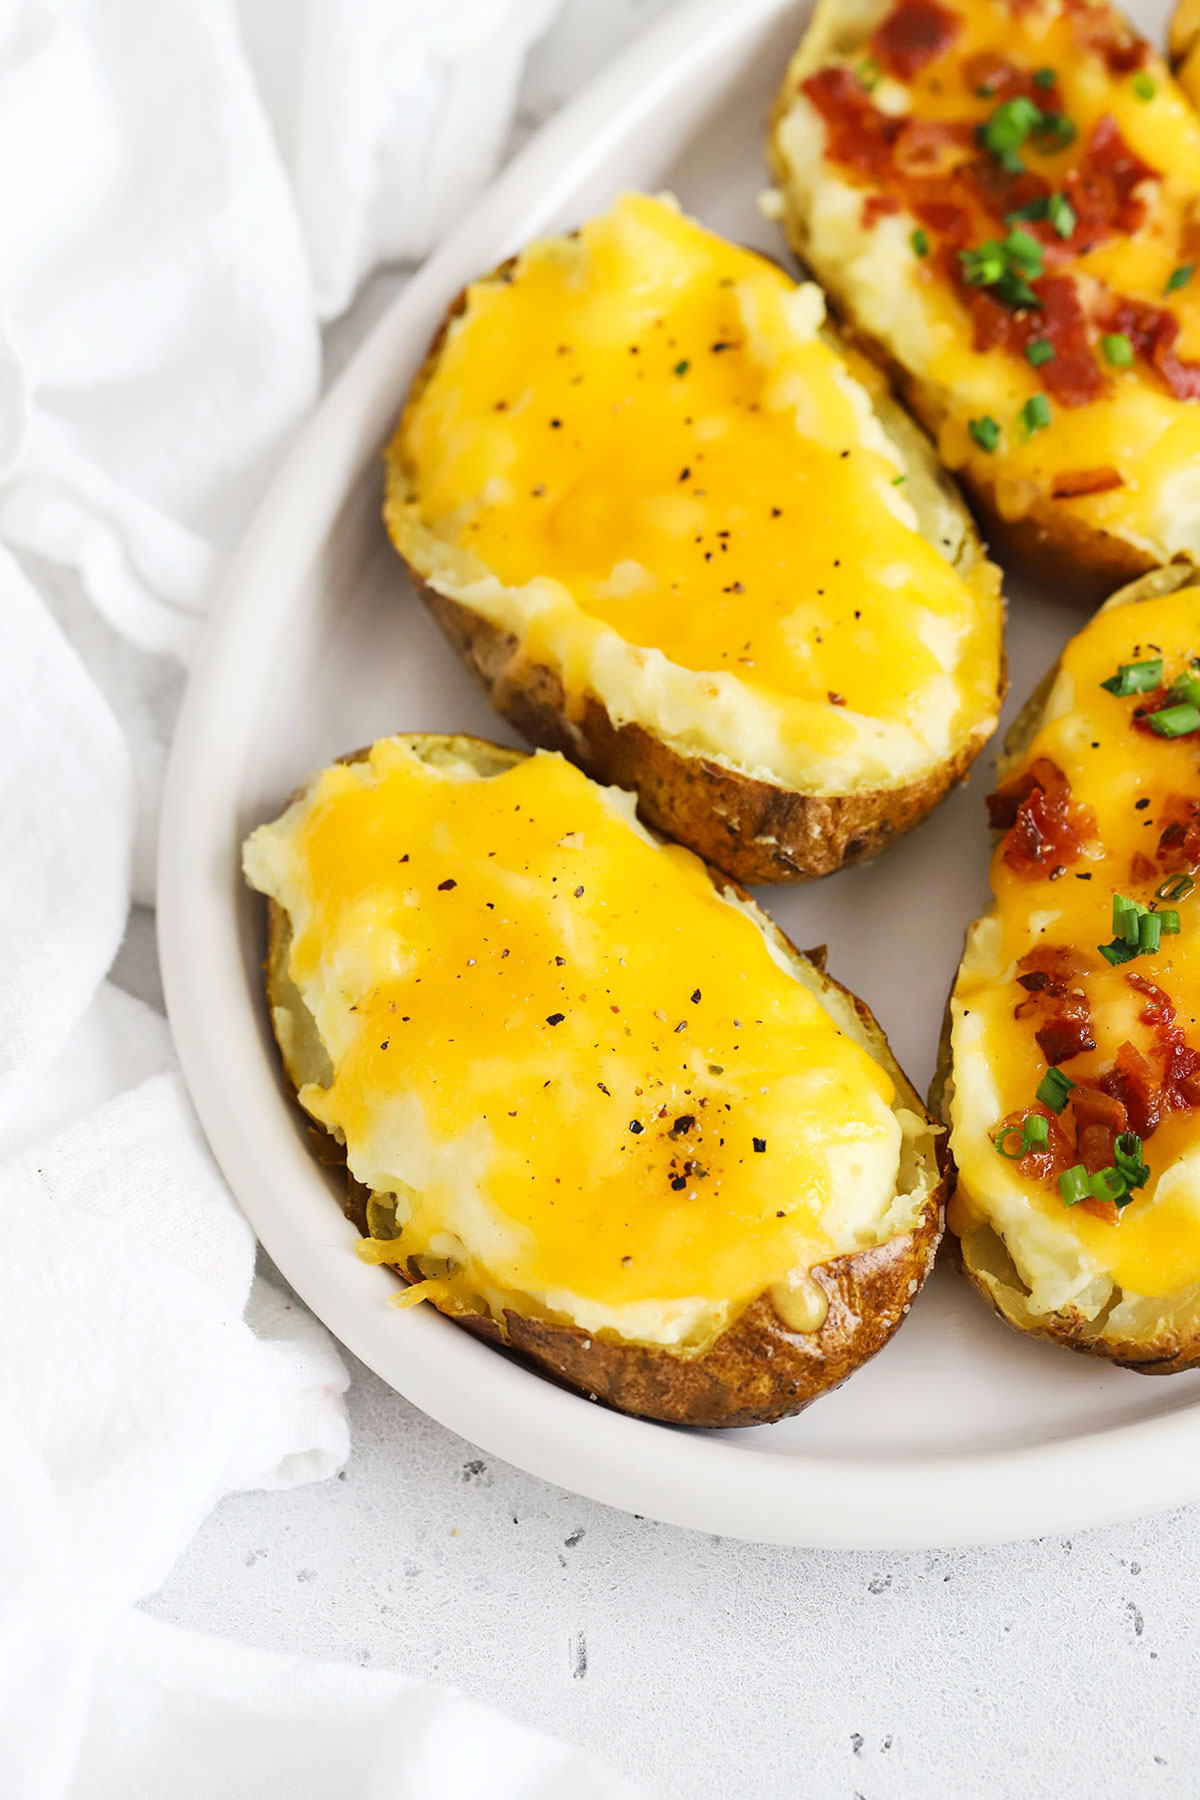 Stuffed twice baked potatoes with cheese, bacon, and chives on a white plate